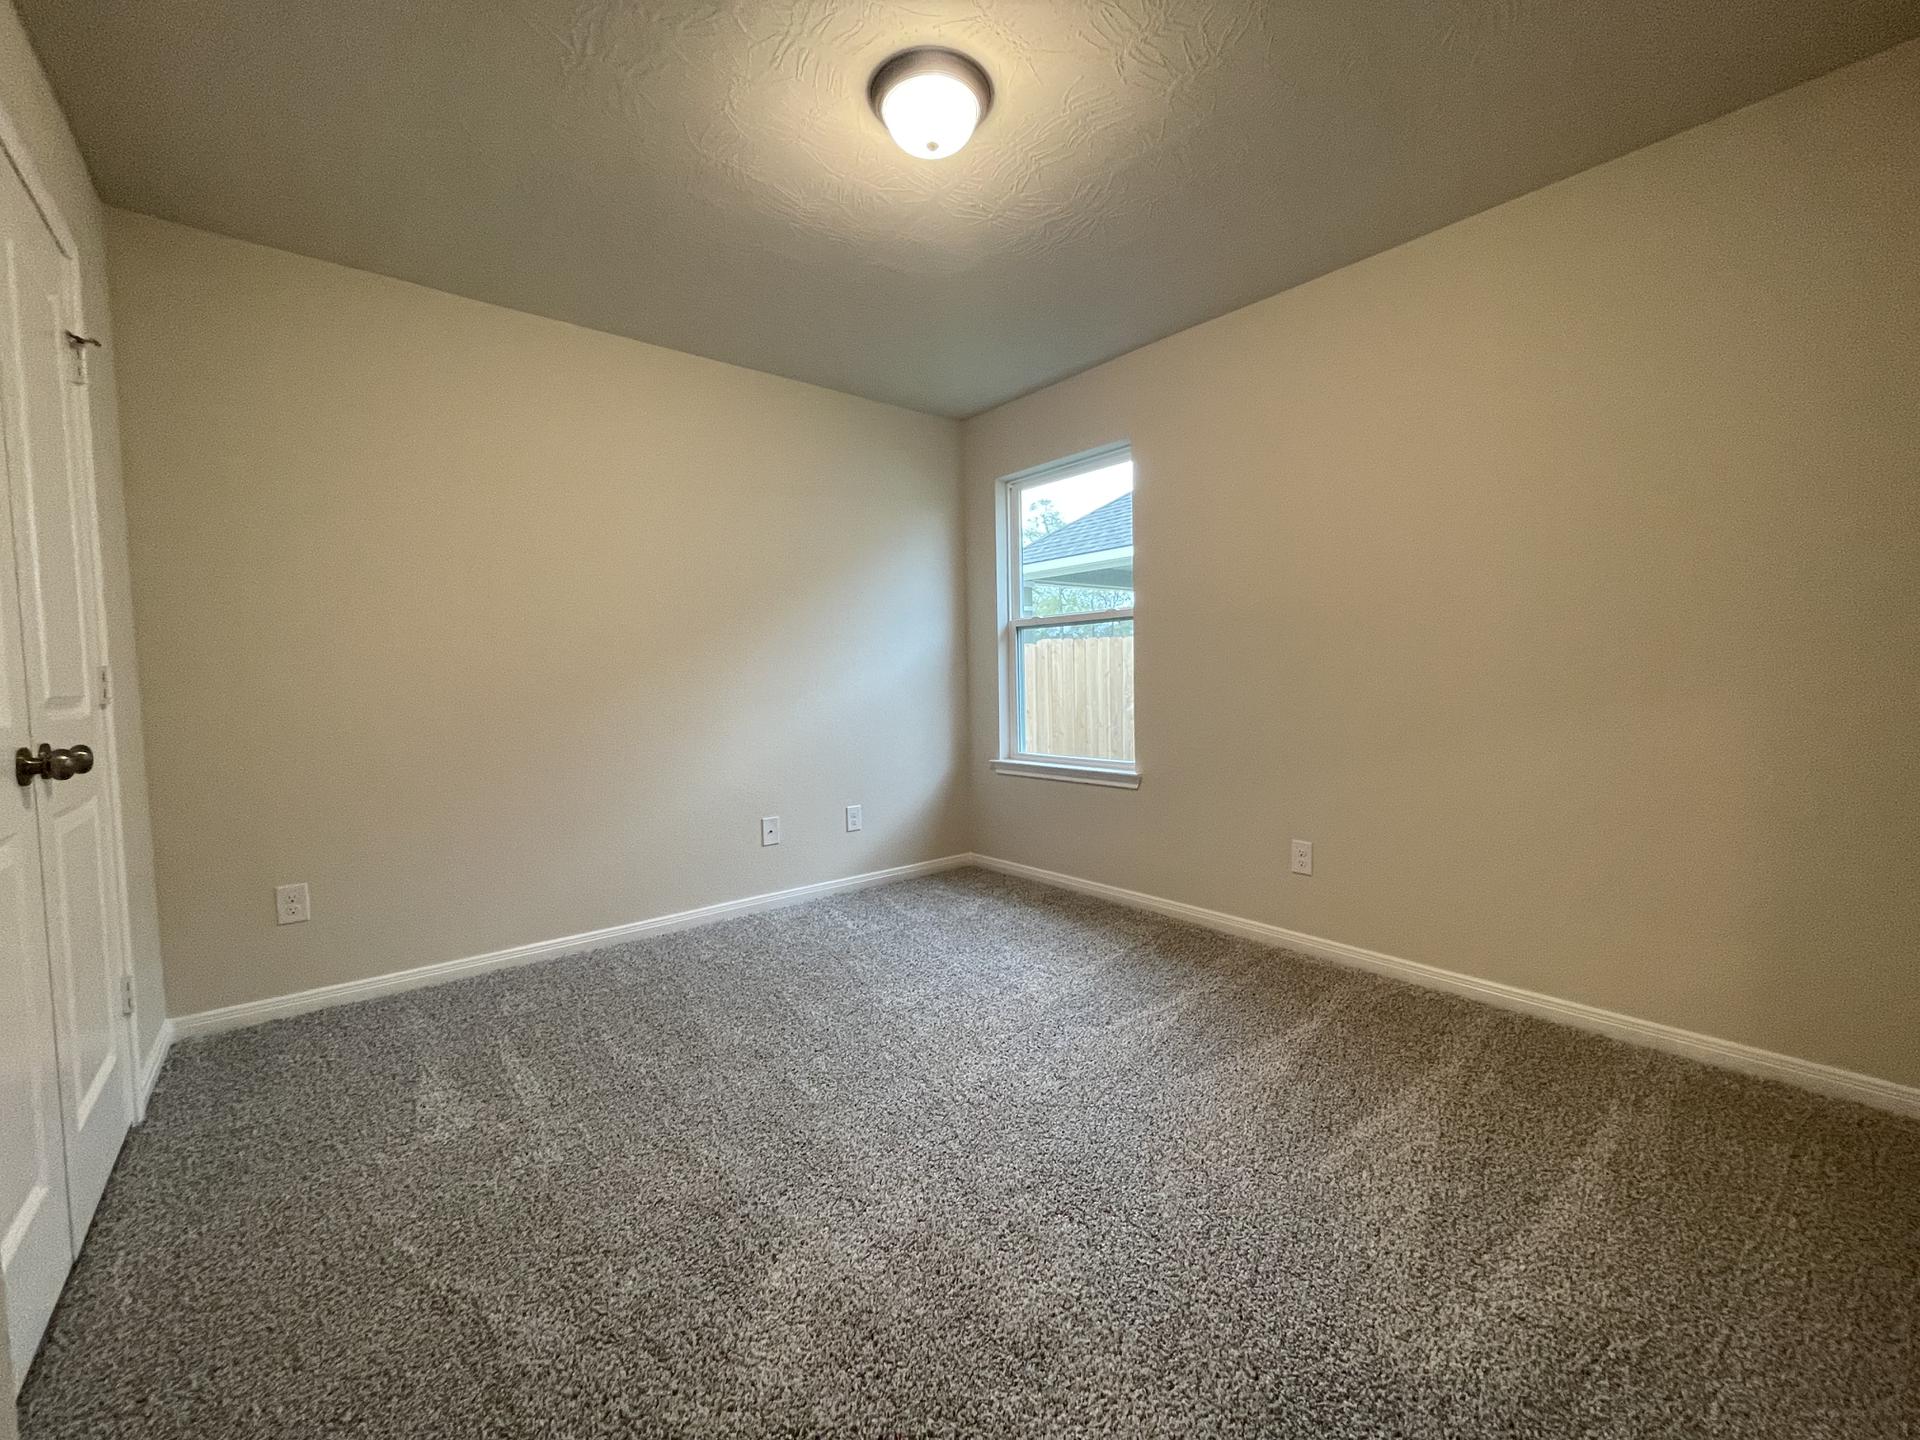 3br New Home in Conroe, TX